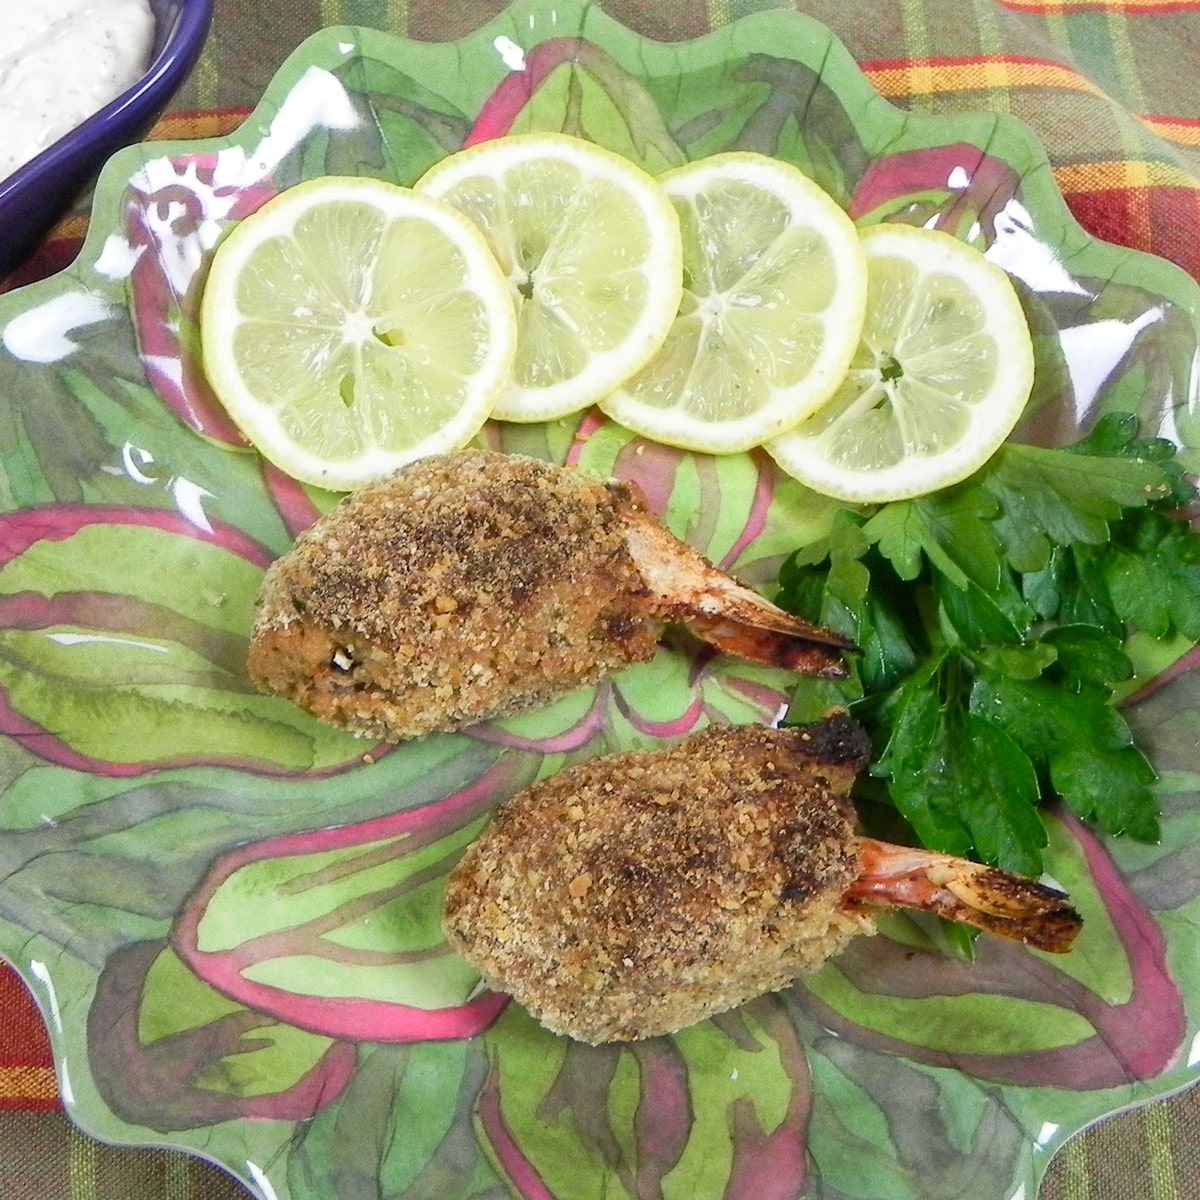 two baked stuffed shrimp on a green plate with lemon and parsley garnish